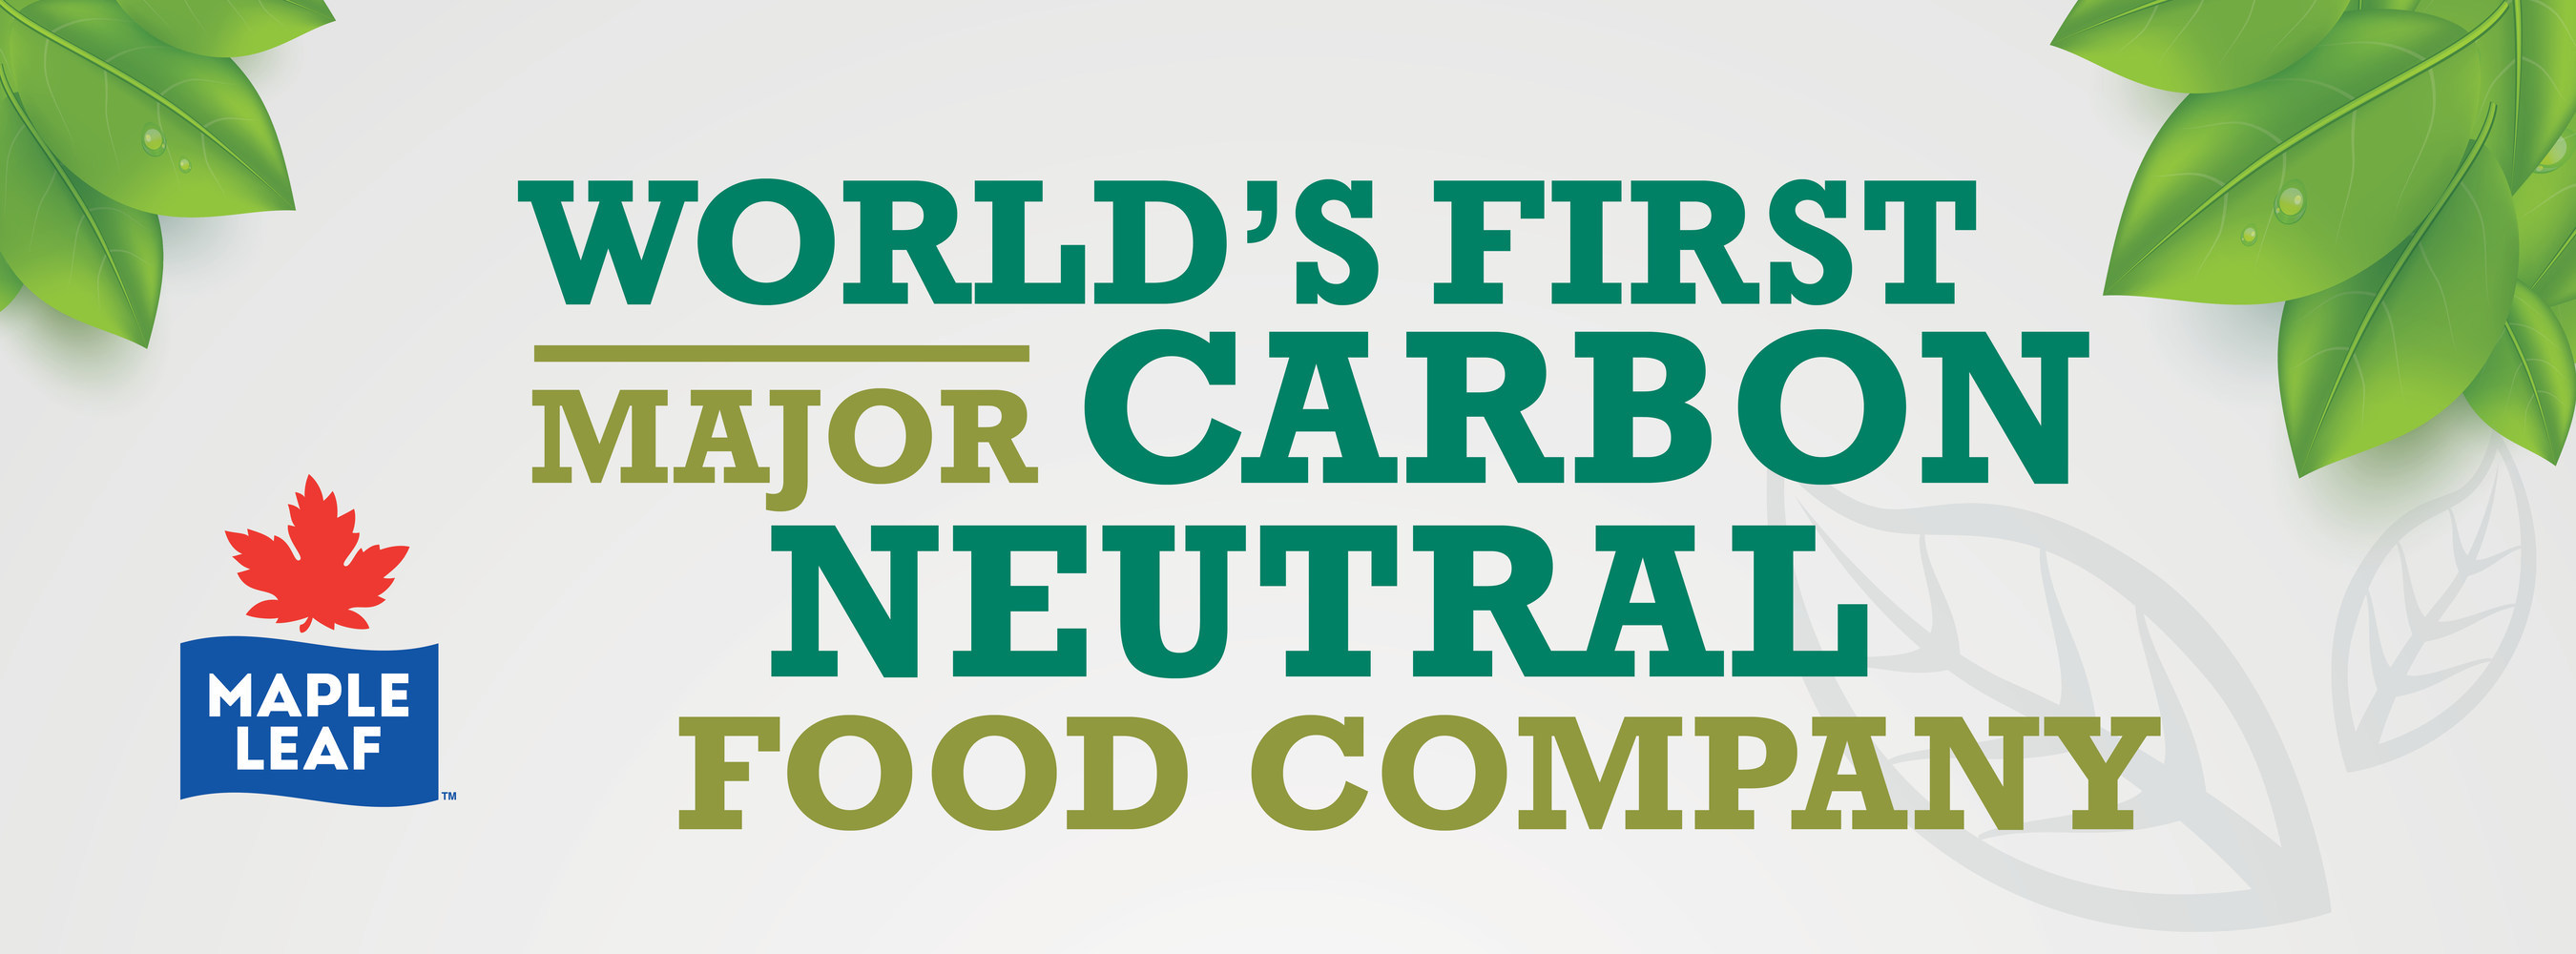 Maple Leaf Foods Becomes First Major Food Company in the World to be Carbon Neutral